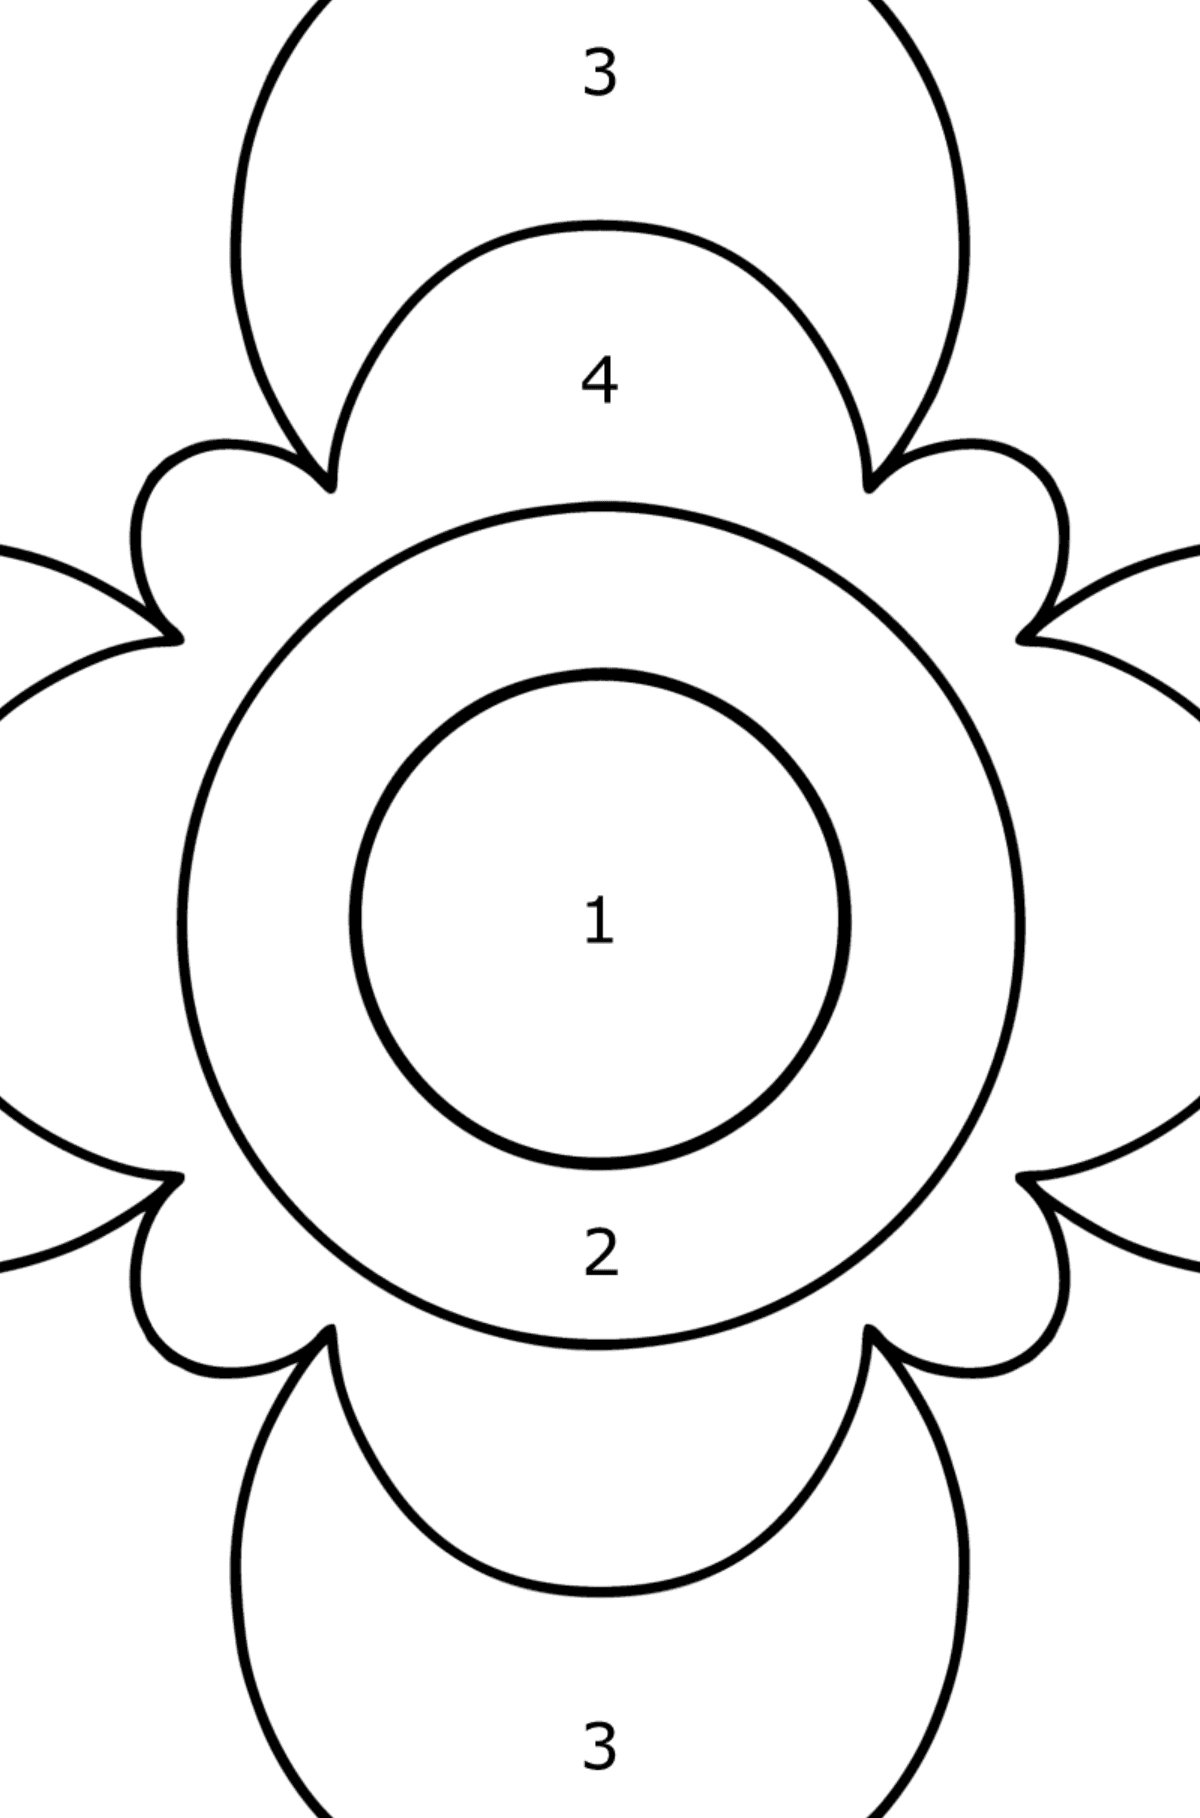 Coloring Anti stress flower for kids - Coloring by Numbers for Kids